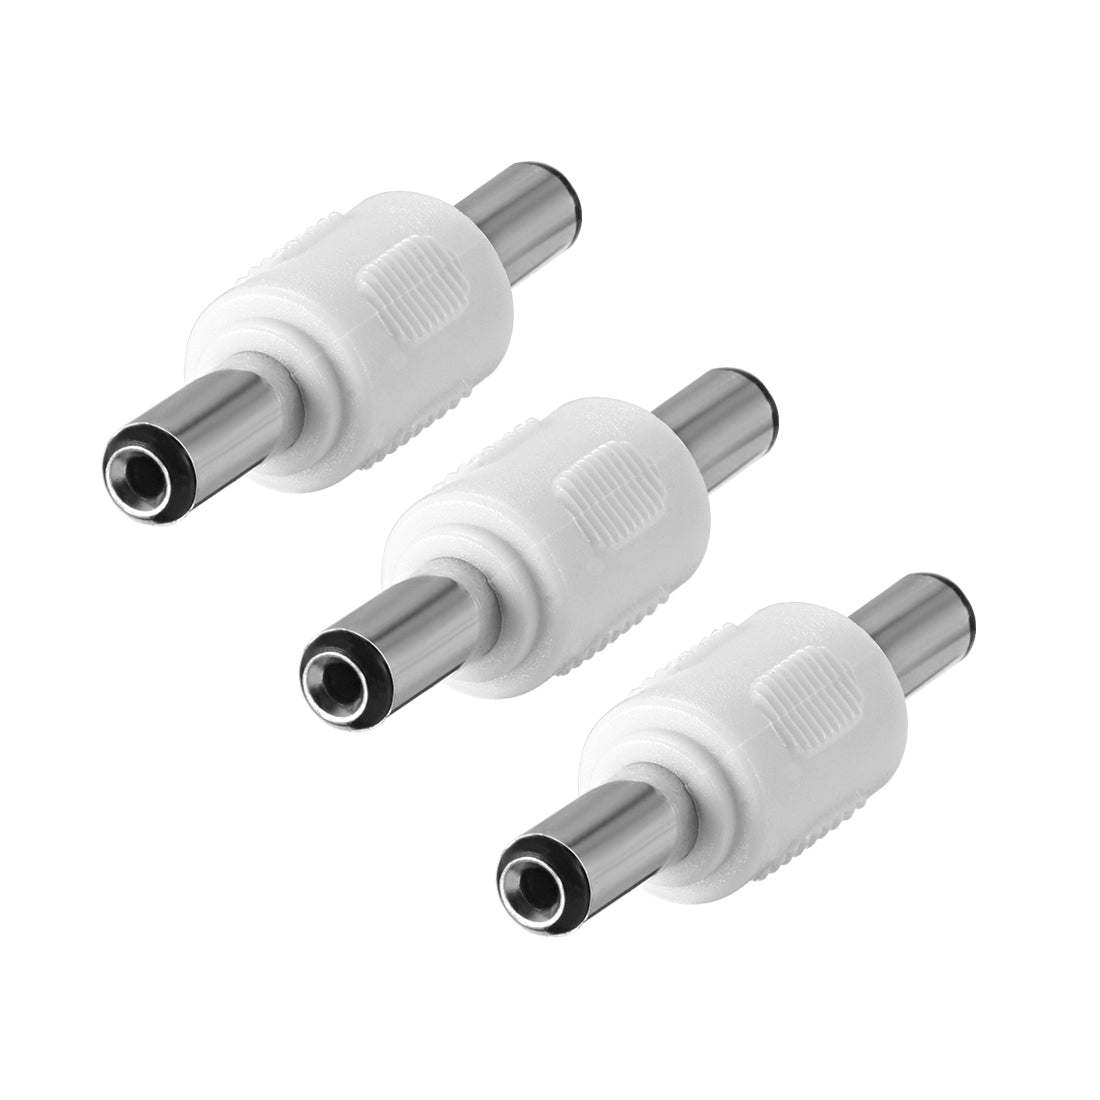 Uxcell Uxcell 5Pcs DC Male to Male Connector 5.5mm x 2.1mm Power Cable Jack Adapter White